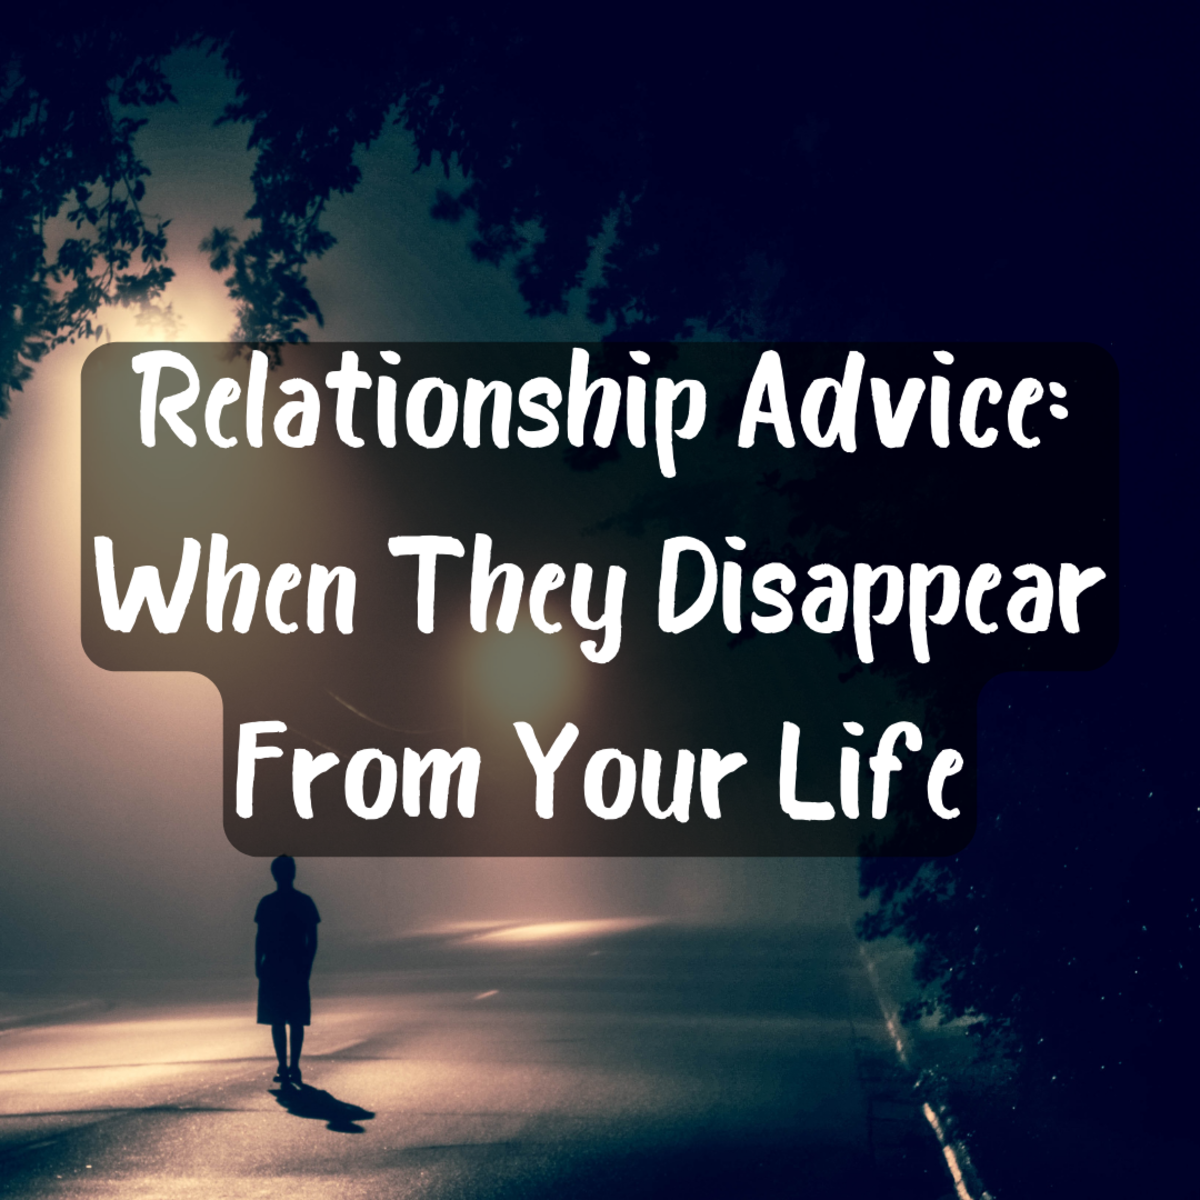 Read on to learn some advice on what to do when your significant other disappears from your life. A lack of closure can be difficult to deal with. You're not alone.